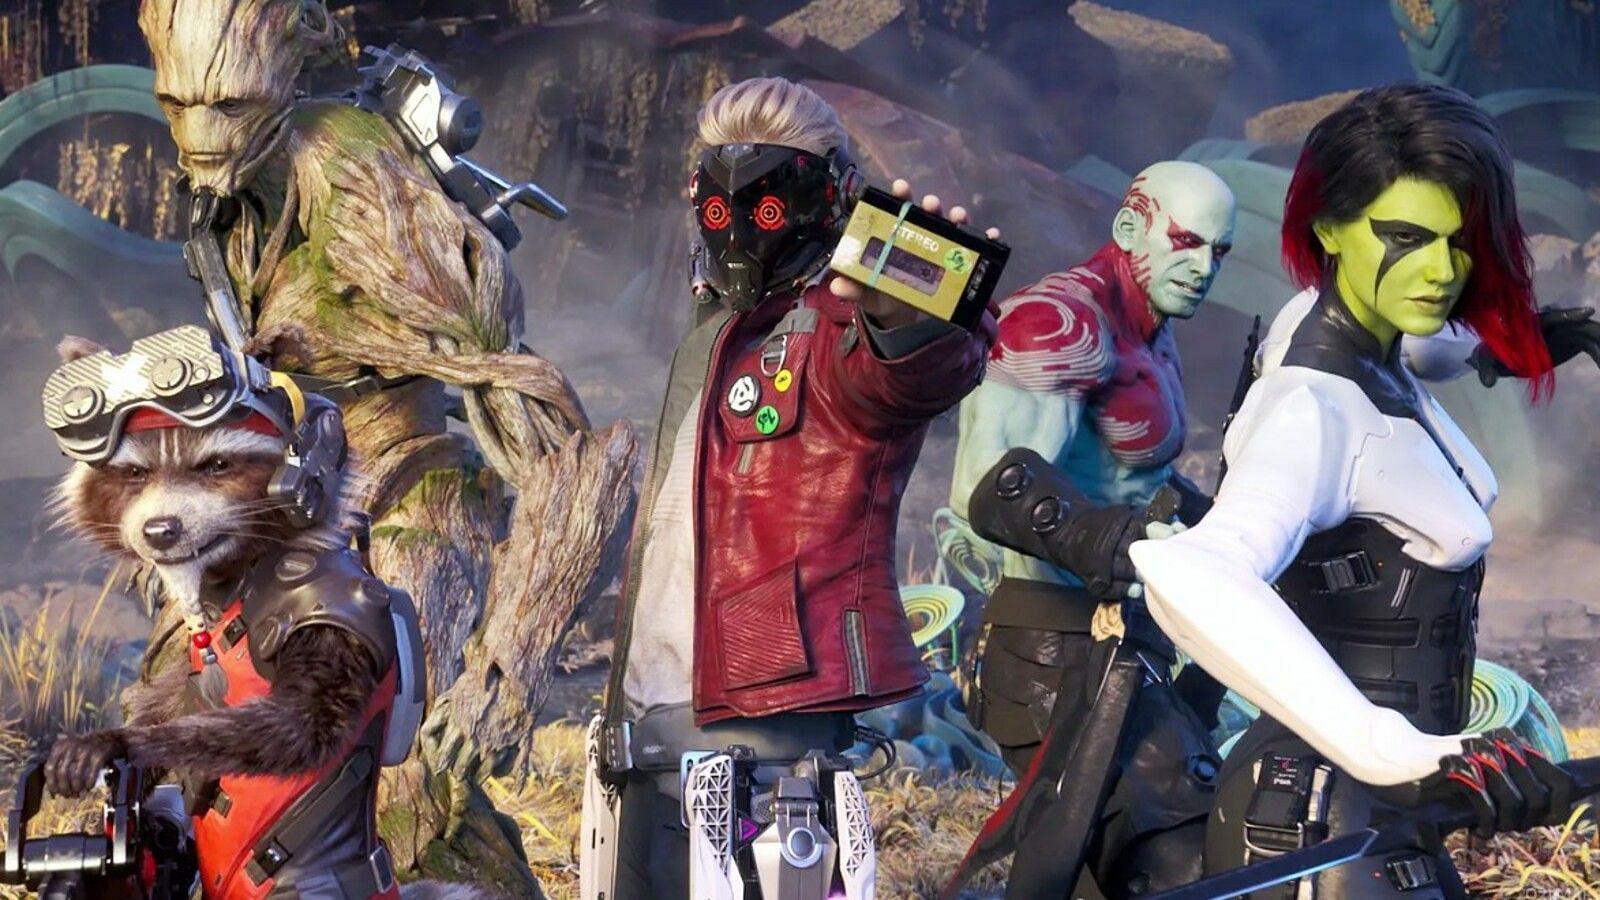 The official artwork of the game featuring all the members of the Guardians of the Galaxy (Image via Square Enix)